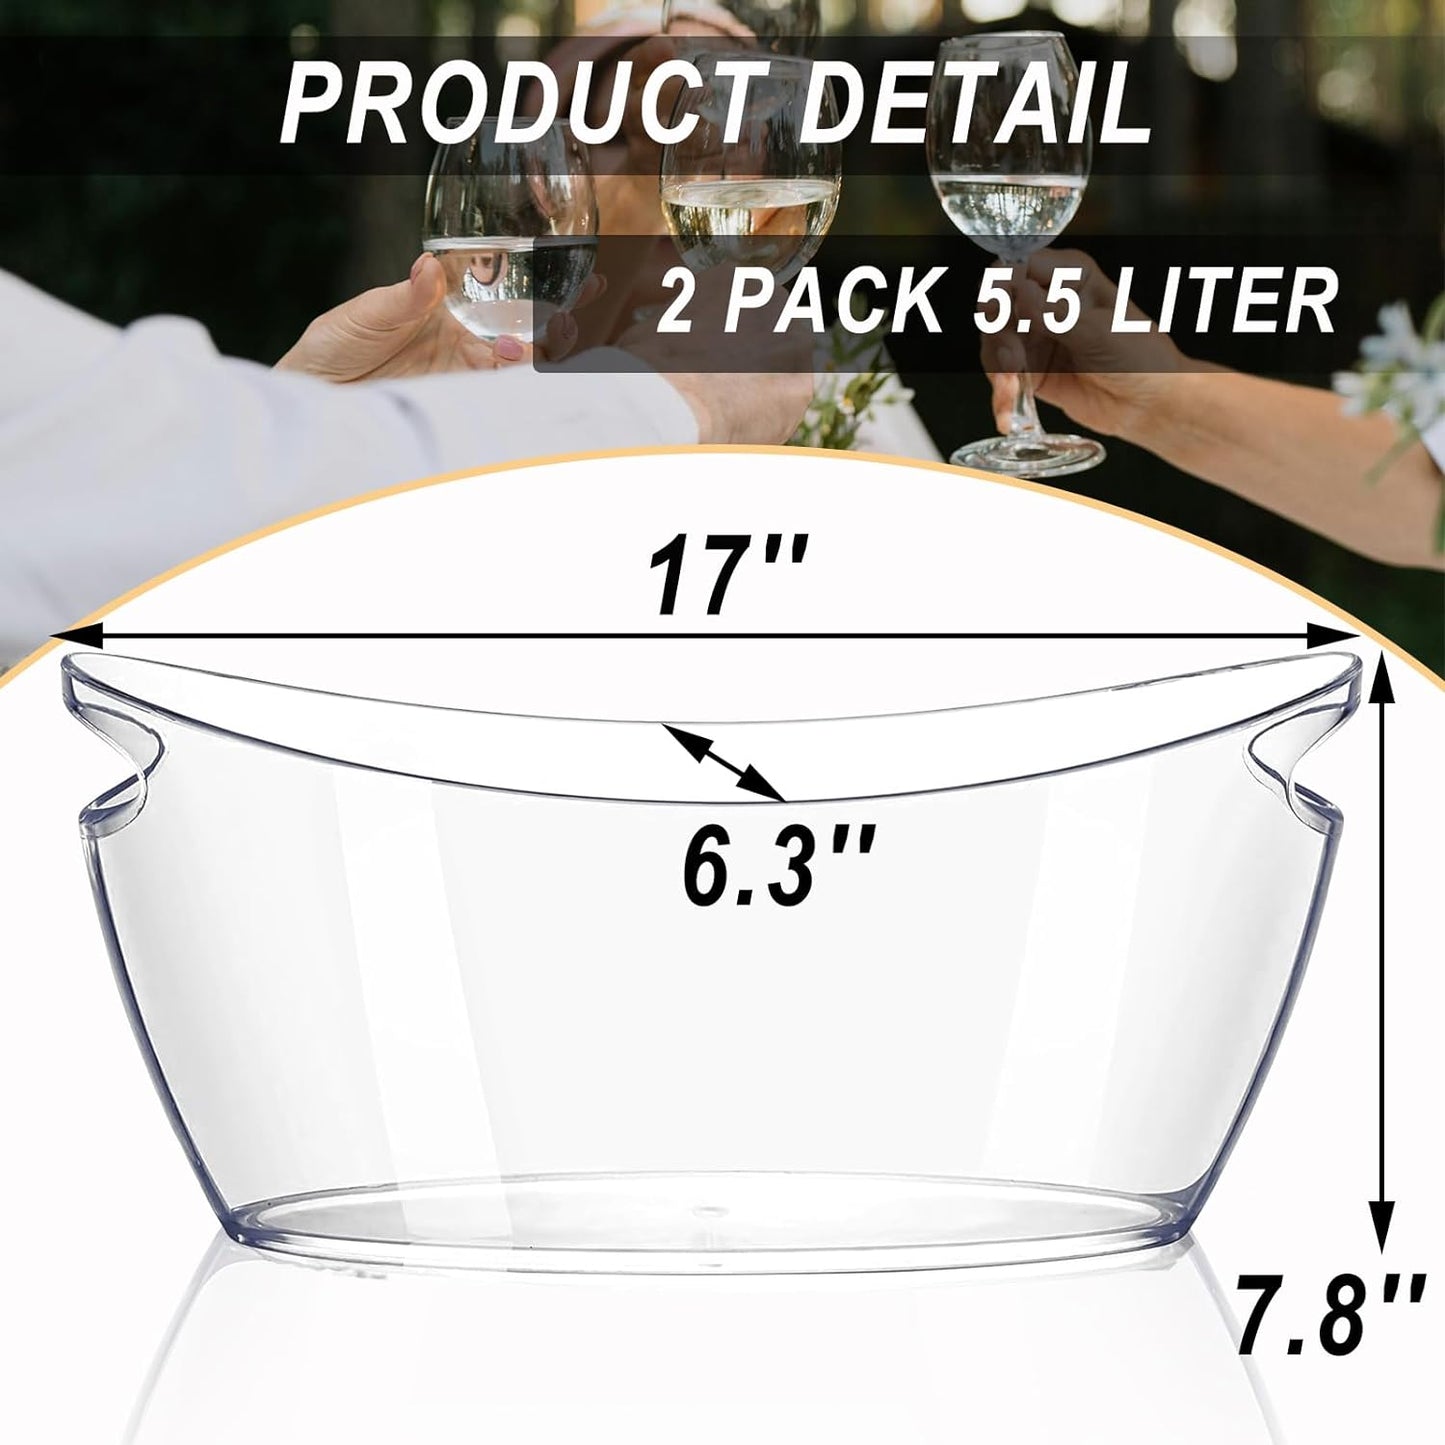 2 Pack Ice Bucket, Acrylic Champagne Bucket 5.5L Beverage Tub for Parties, Mimosa Bar Supplies, Cocktail Bar, Champagne, Beer, Wine, Clear, Long and Narrow